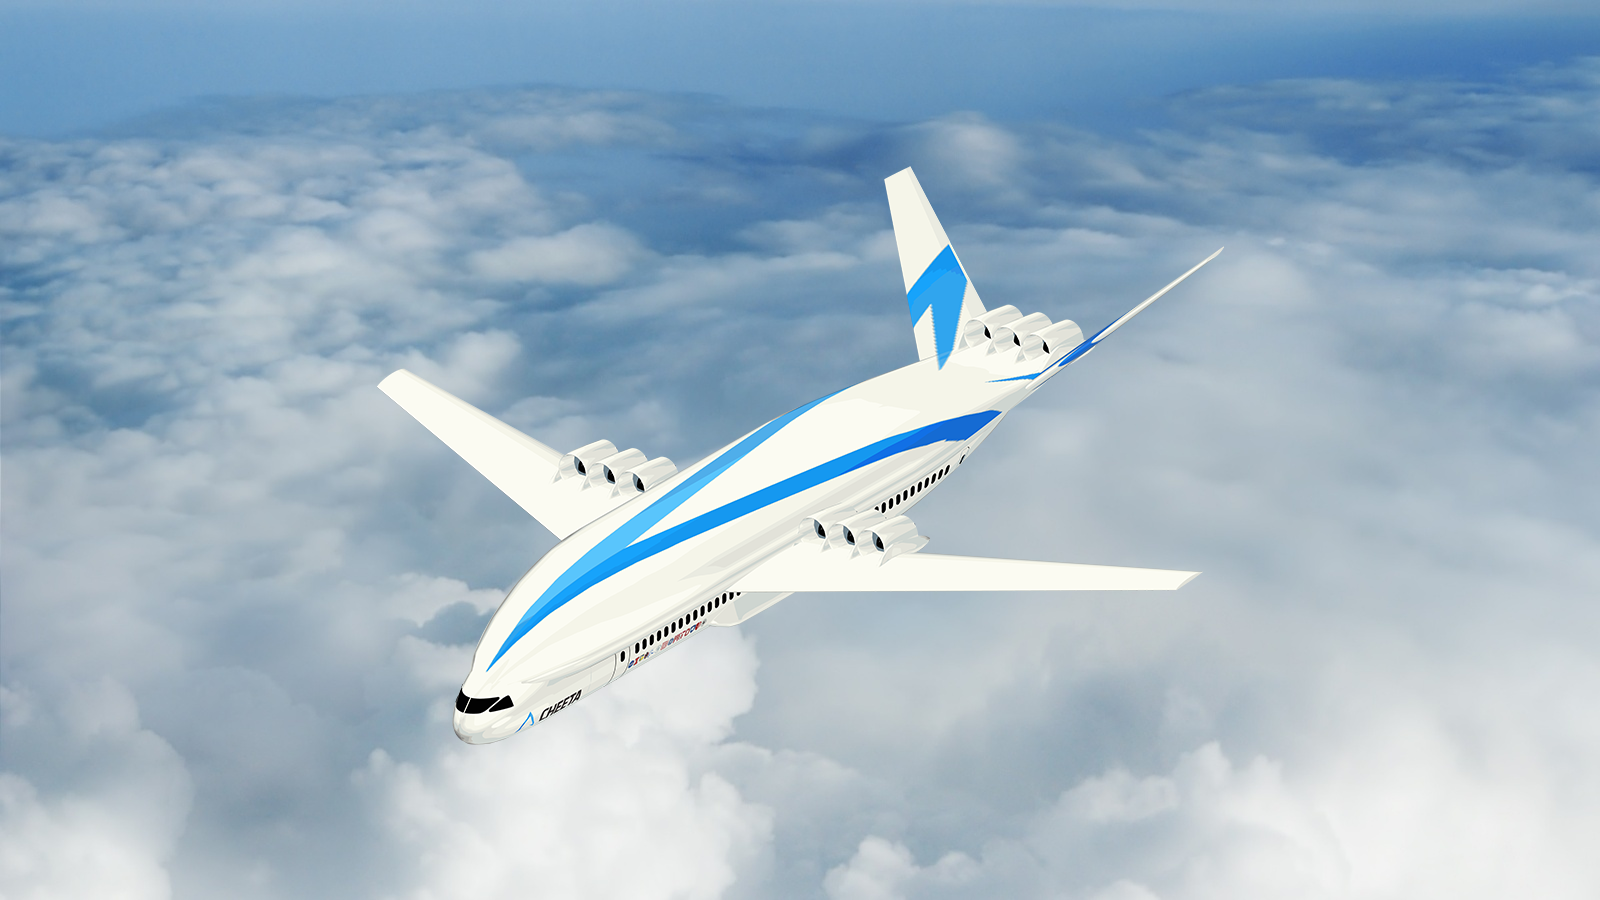 Conceptual configuration of hydrogen-electric transport aircraft.